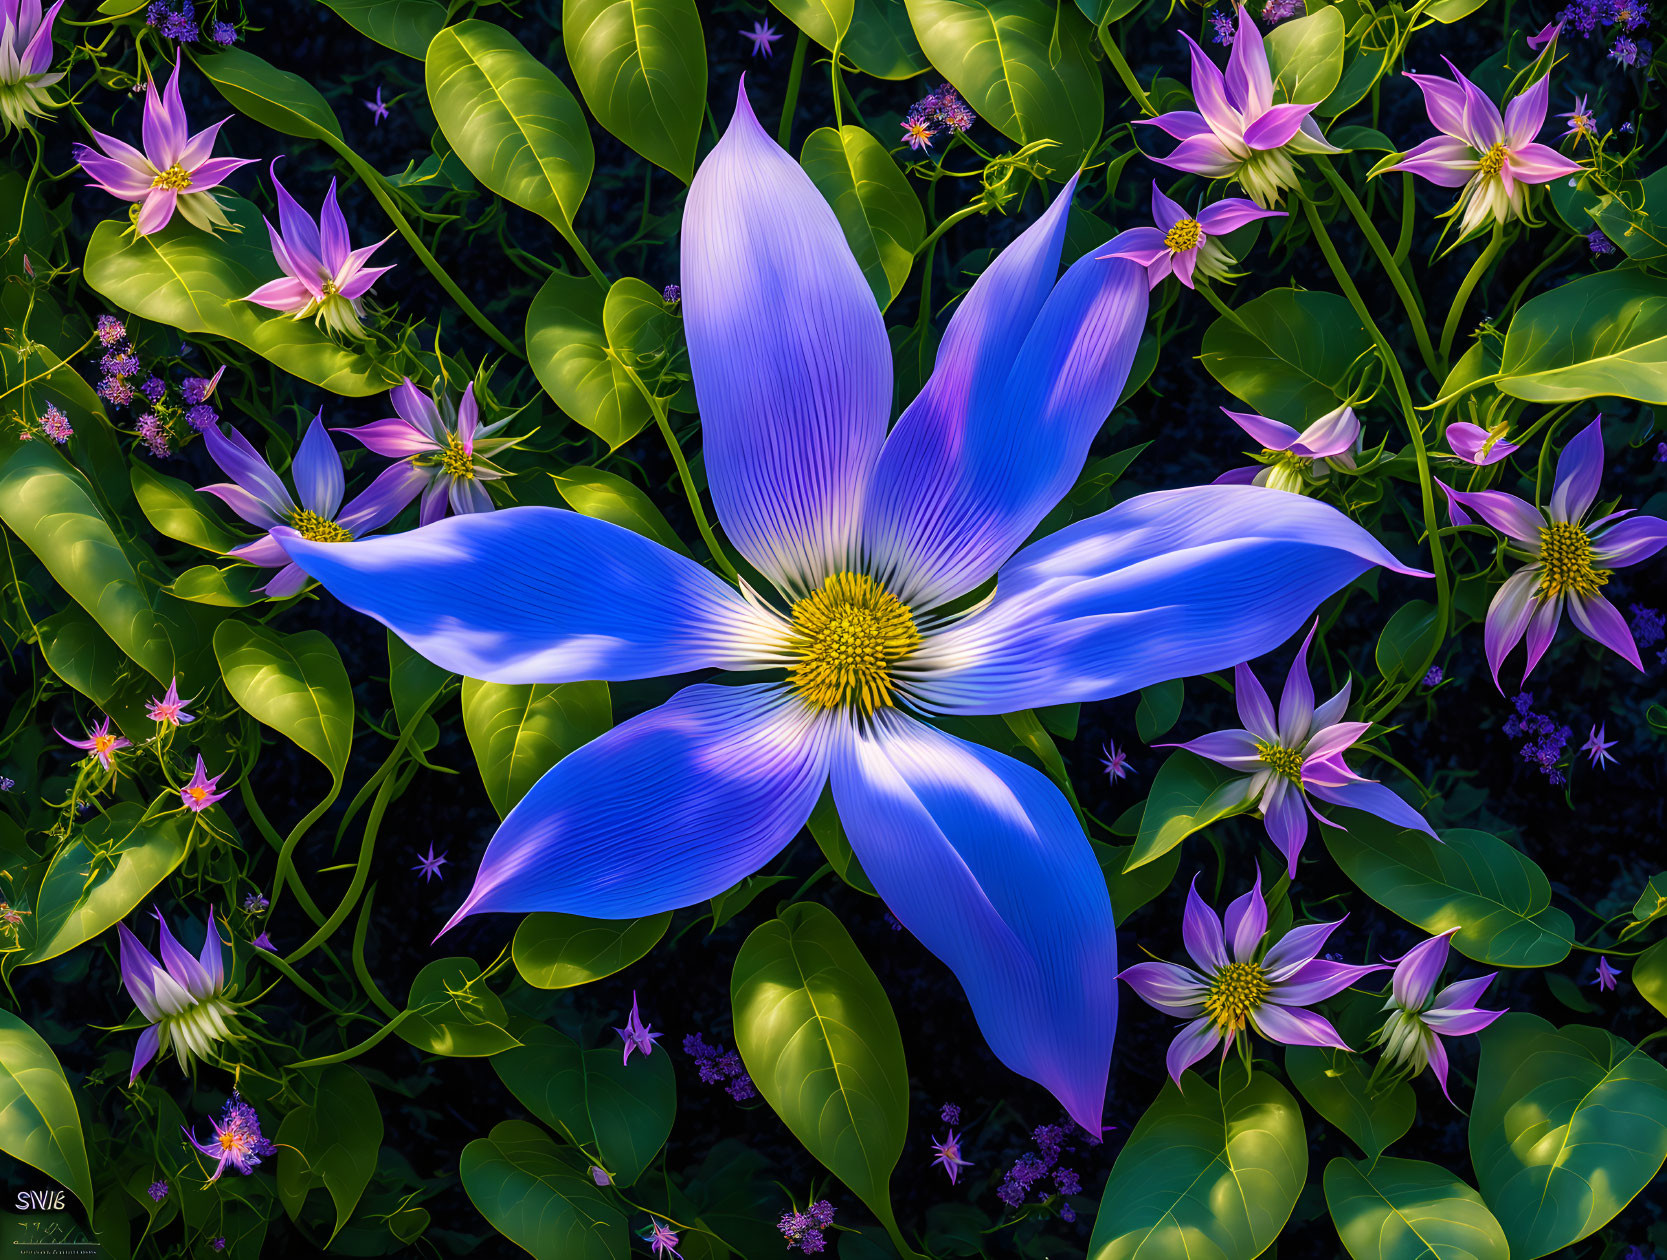 Vibrant Blue Flower Among Purple Flowers and Green Foliage